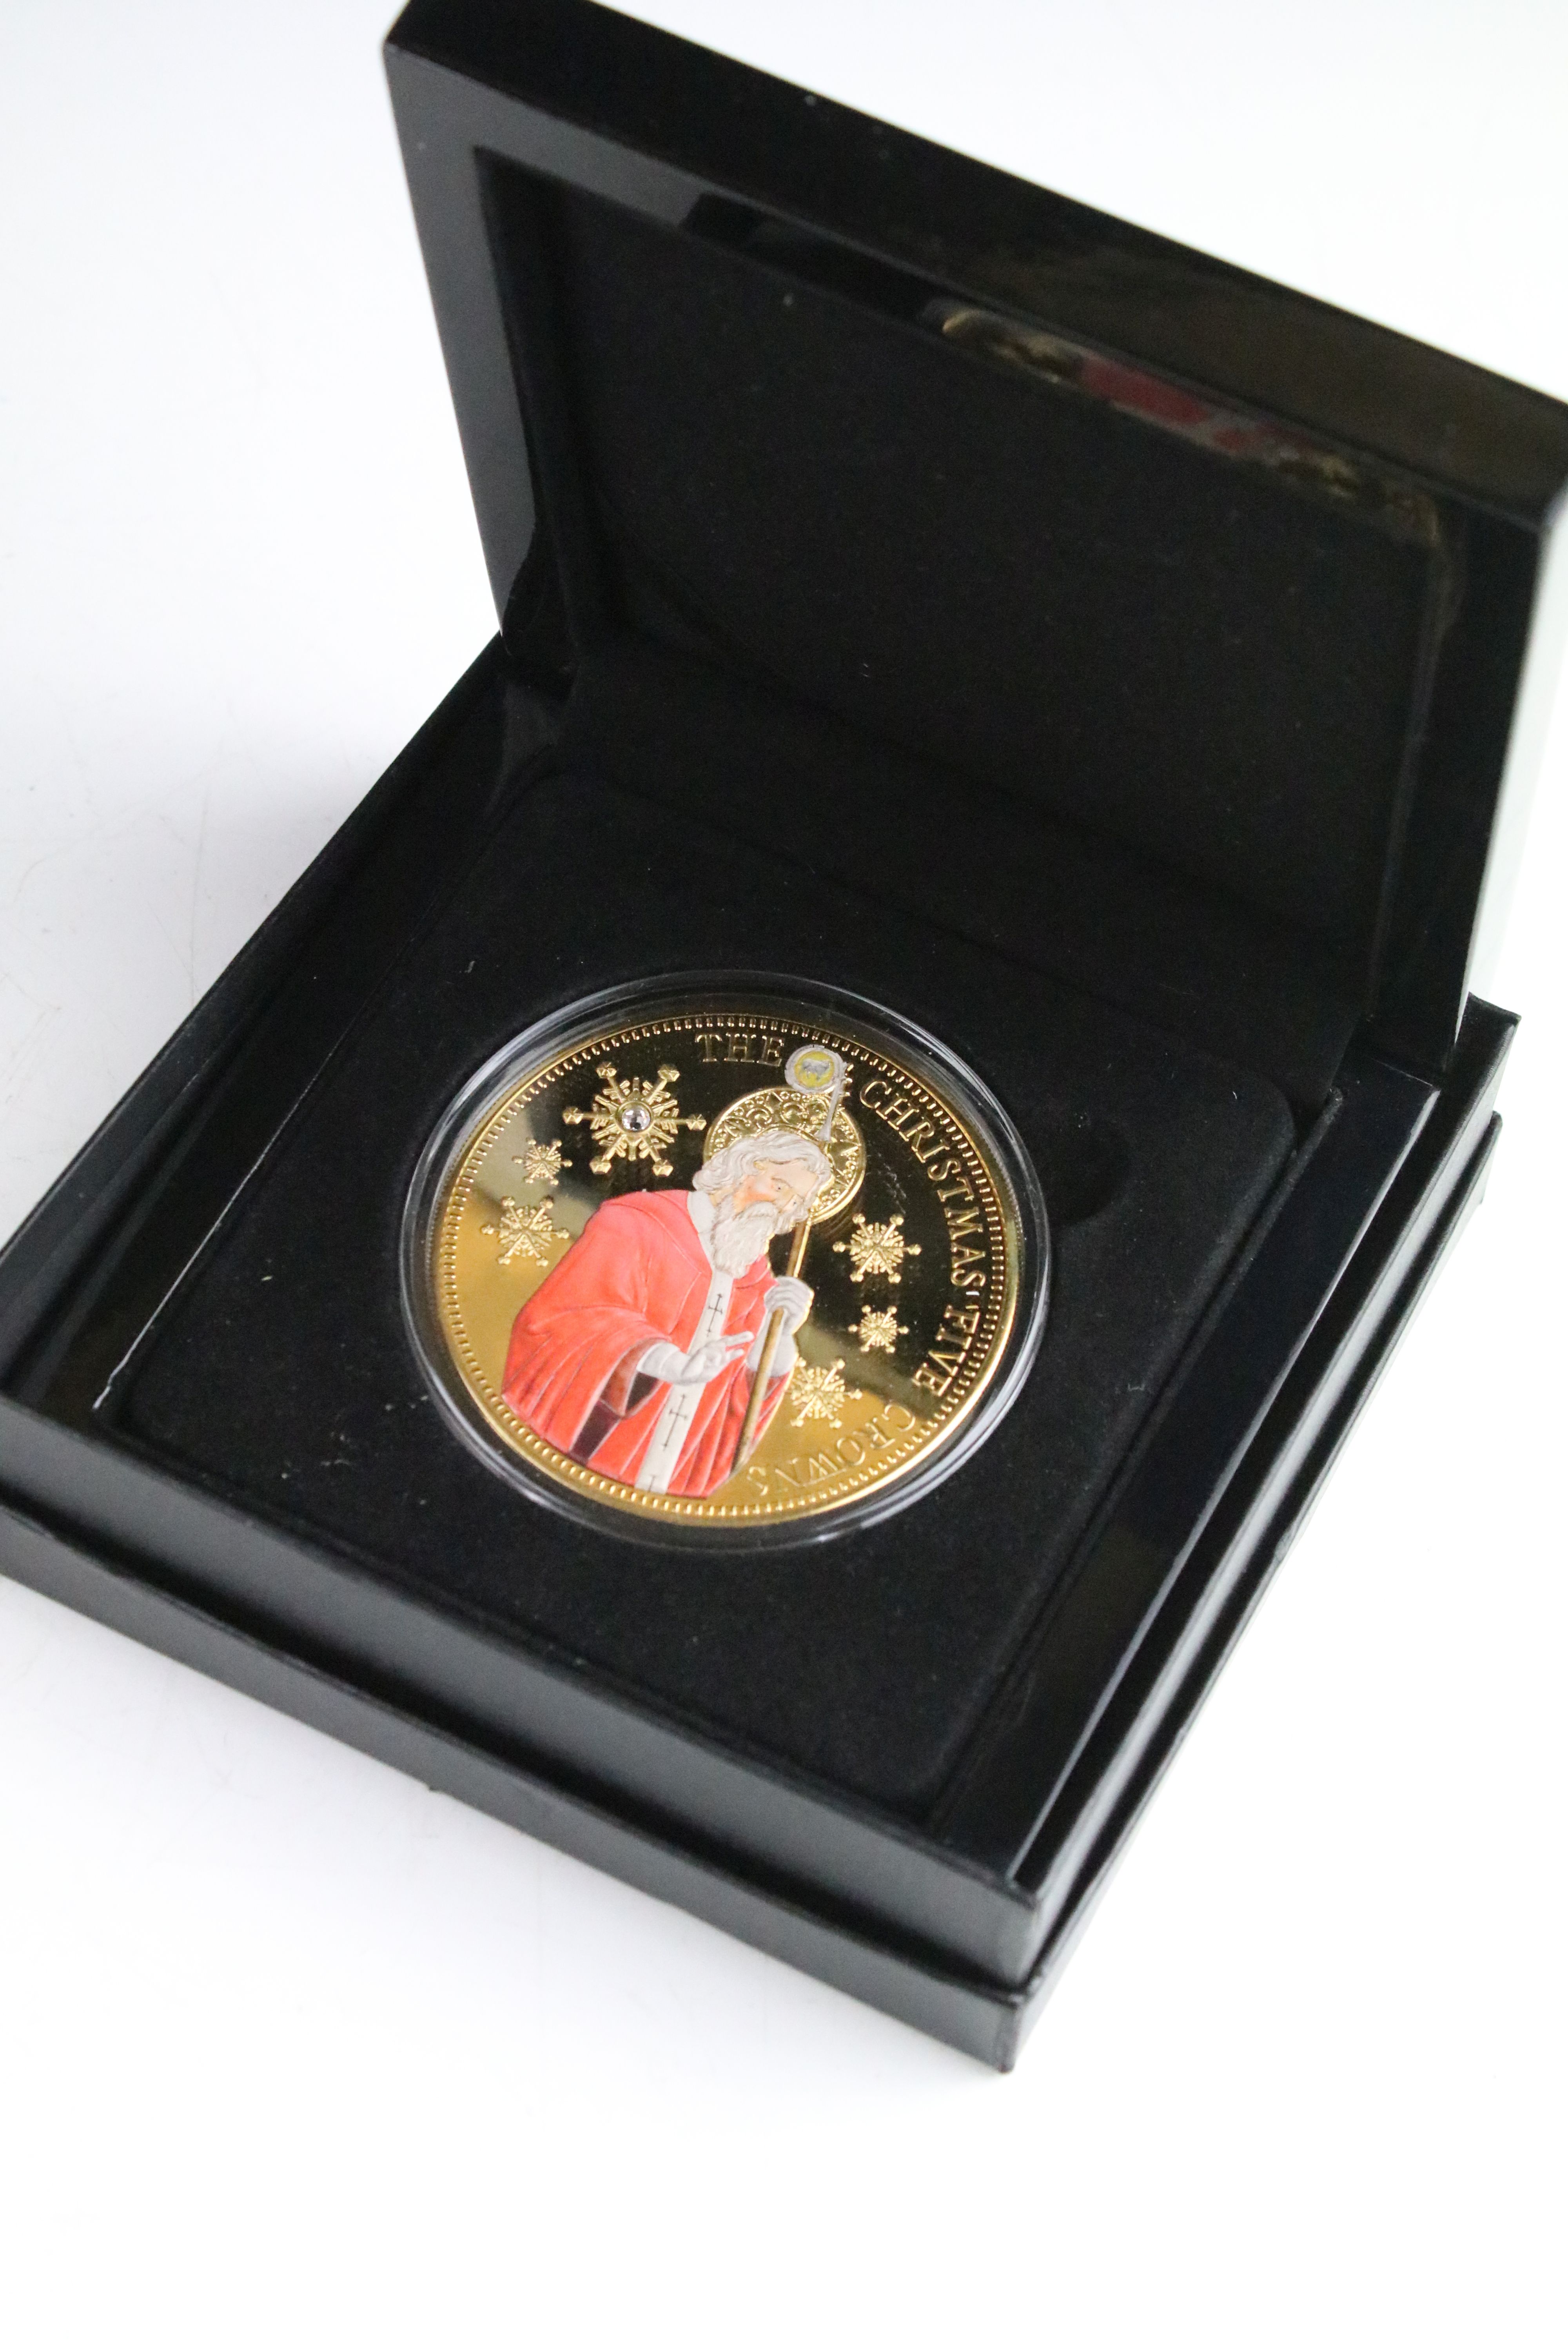 A collection of mixed coins to include uncirculated coin sets, proof like collectors coins and - Image 12 of 14